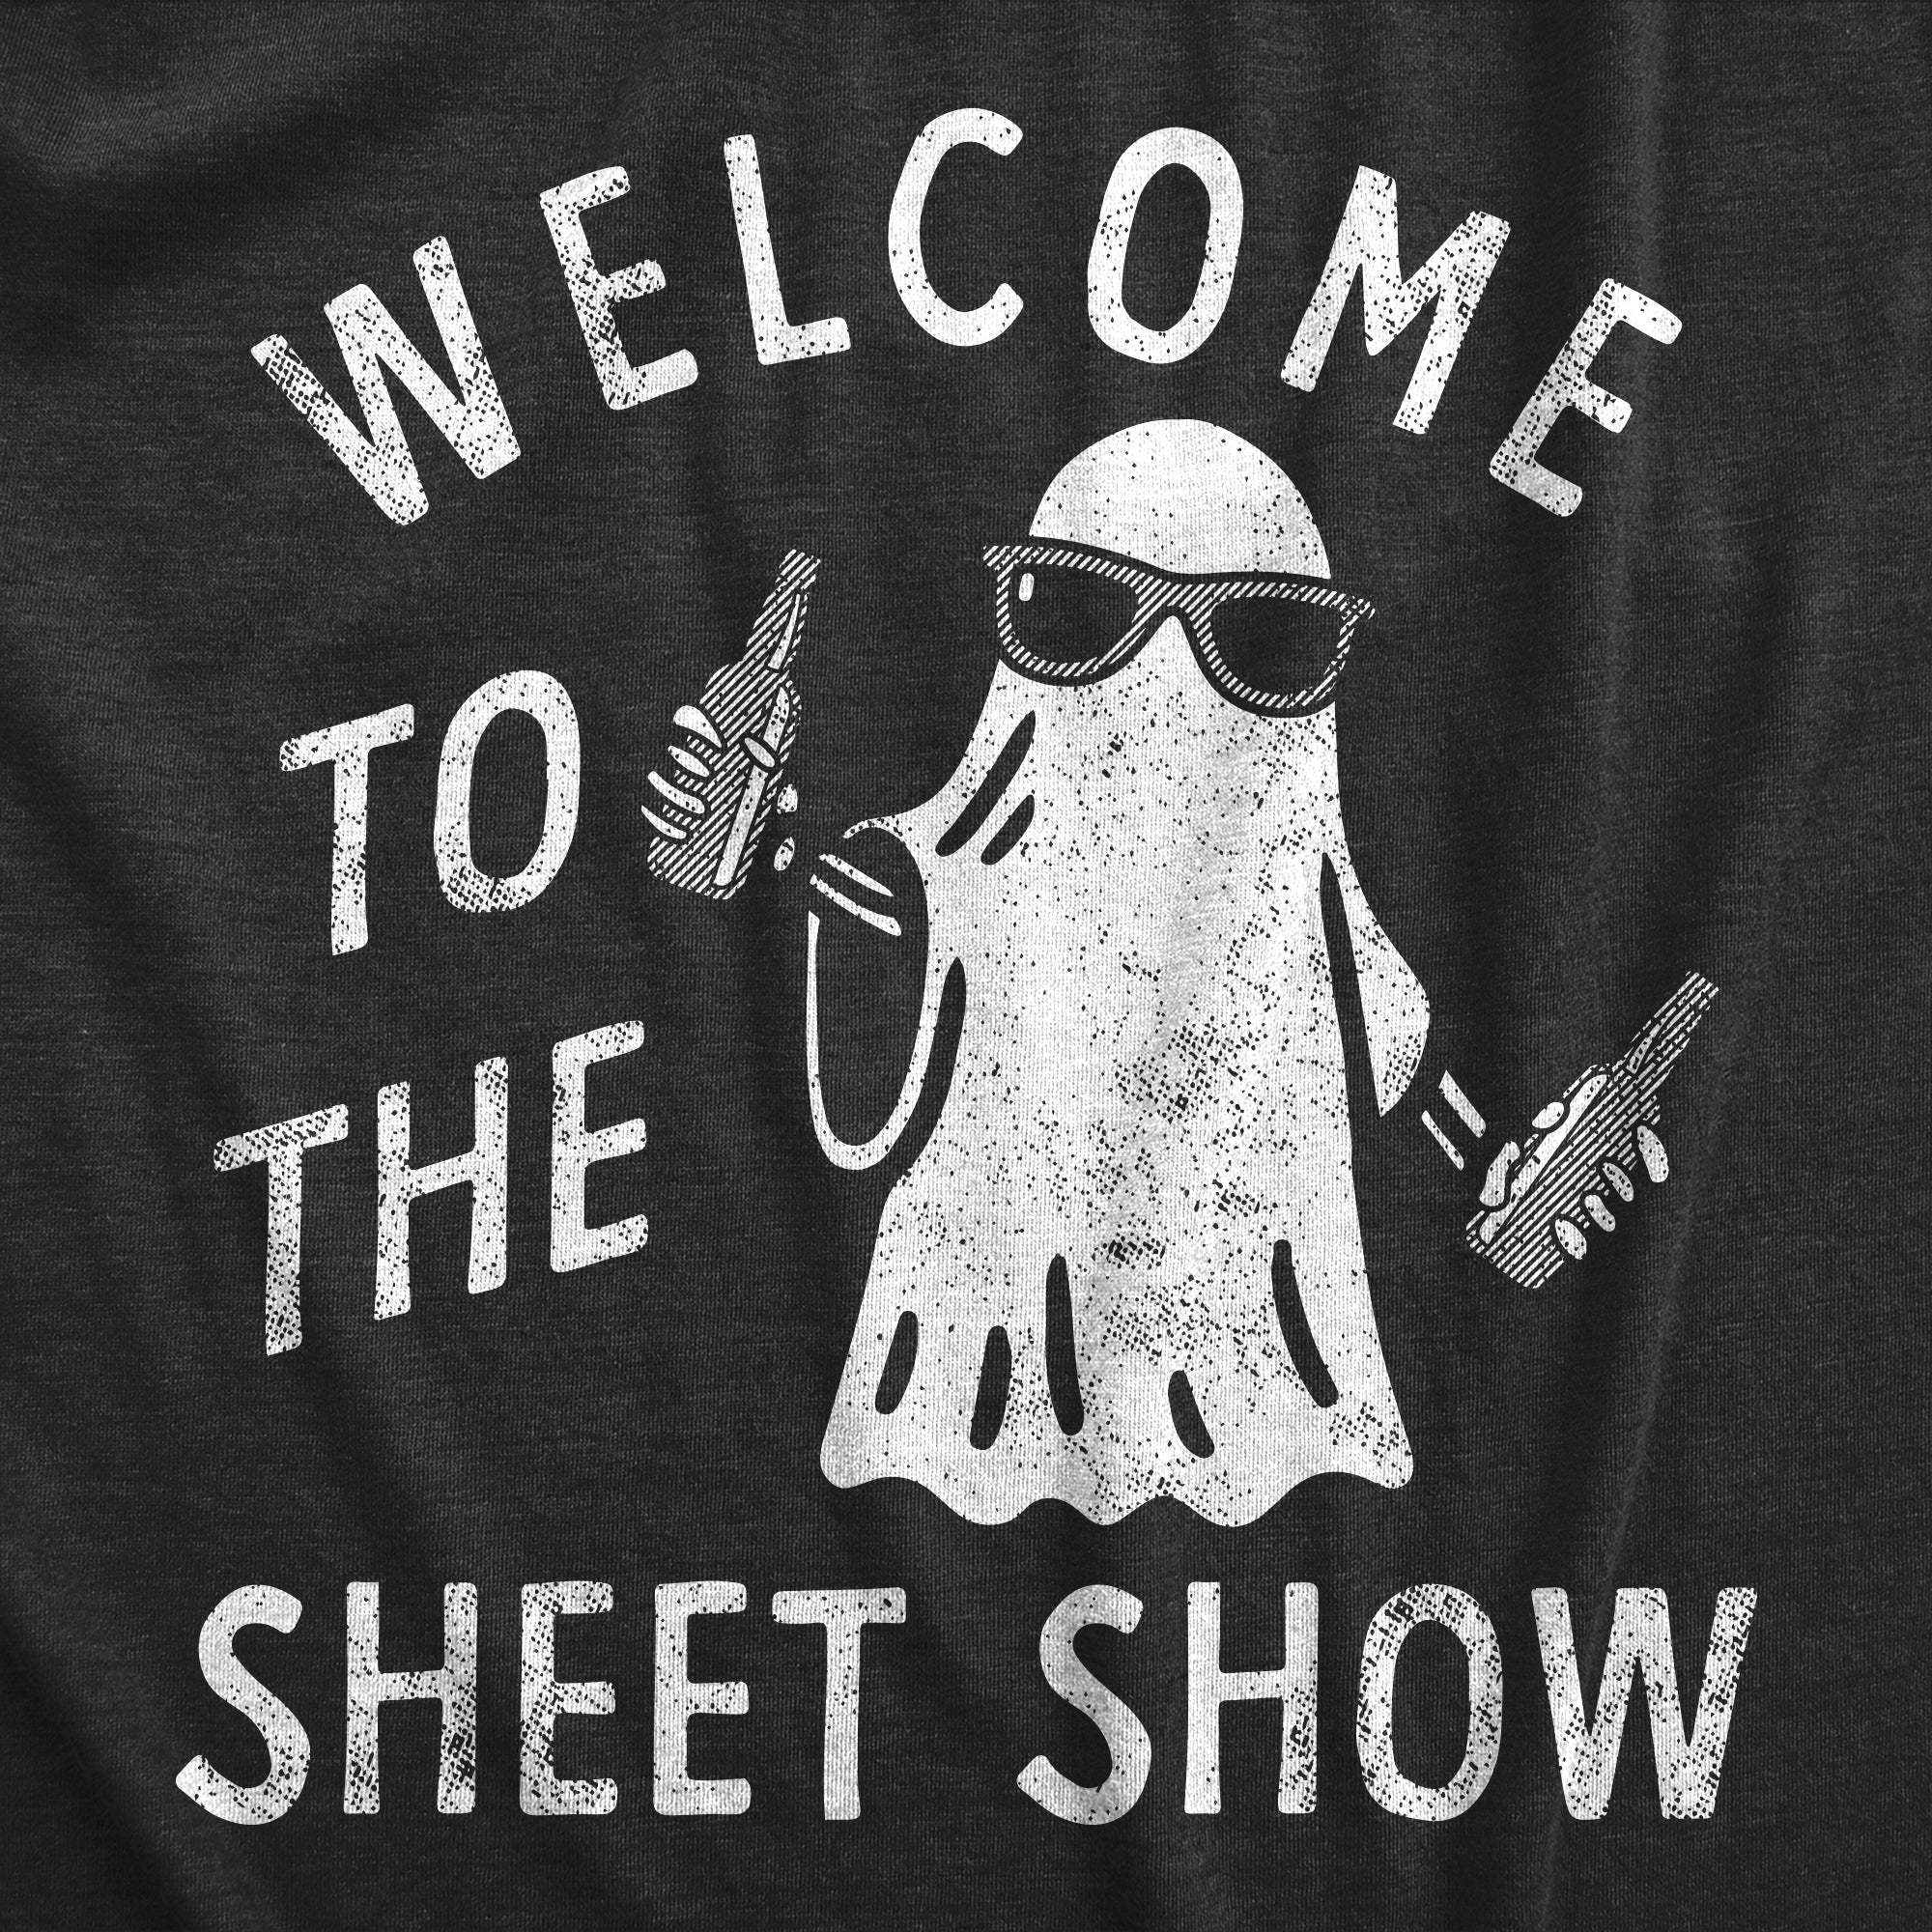 Funny Heather Black - SHEET Welcome To The Sheet Show Mens T Shirt Nerdy Halloween Drinking Tee